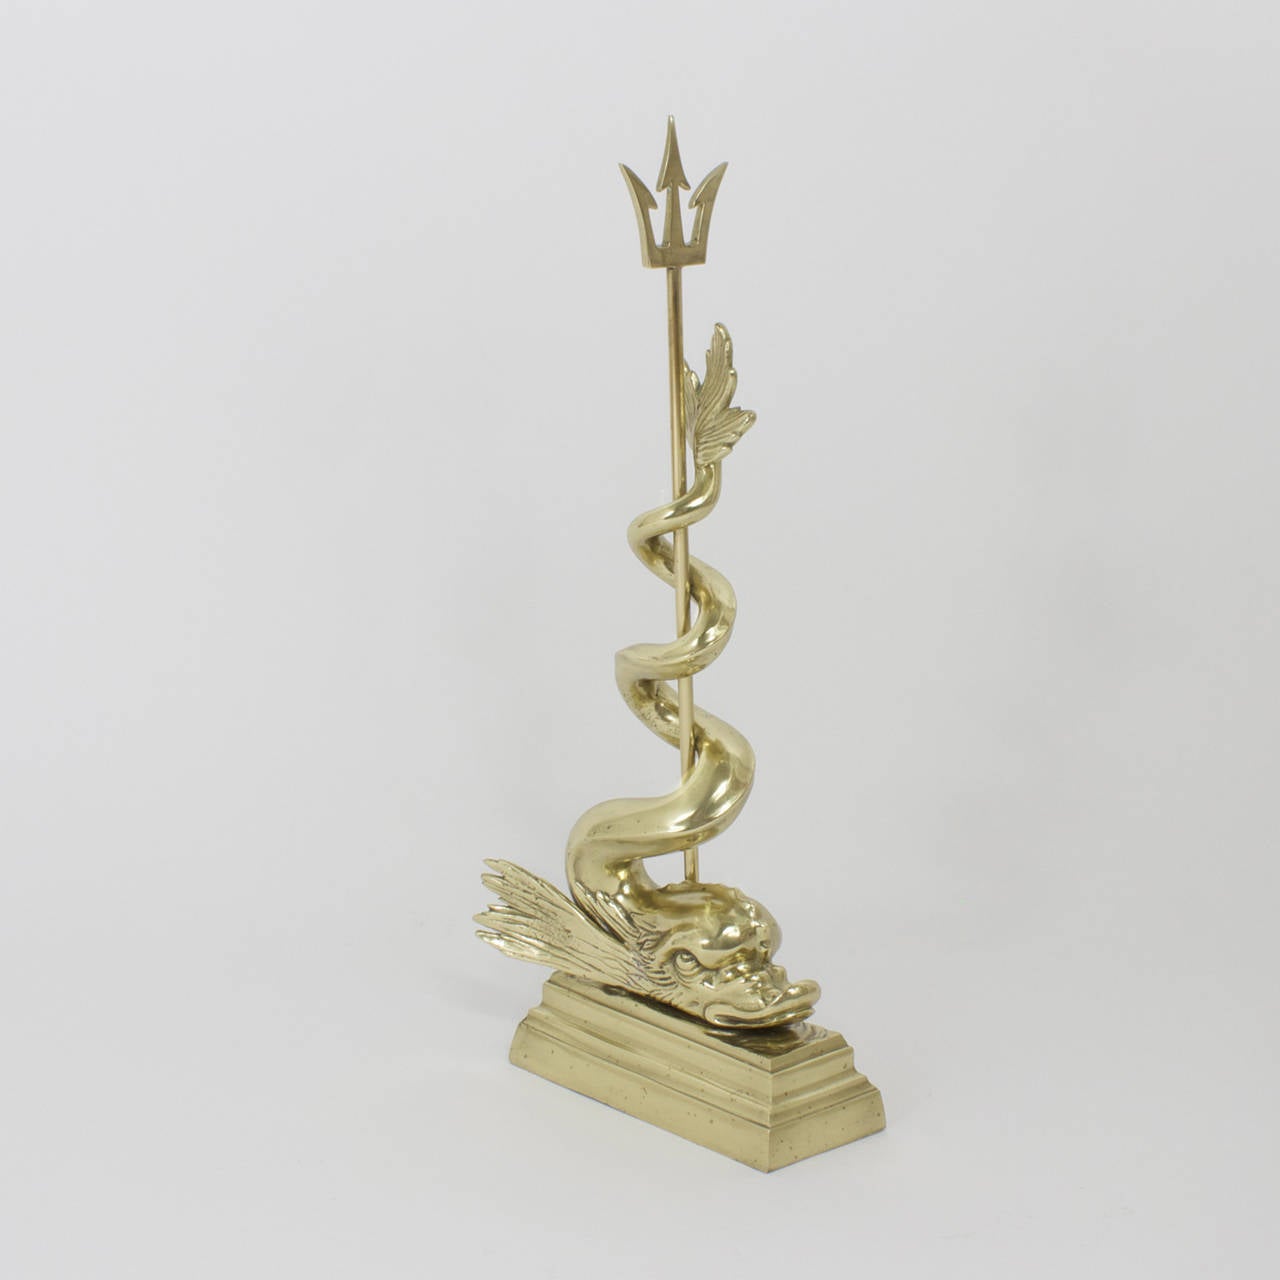 Nautical, cast brass, antique doorstop with hand polished and lacquered finish. Depicting a mythological grotto dolphin style sea serpent coiled around Poseidon's trident which is then mounted on a multi tiered classical plinth. This is certainly a